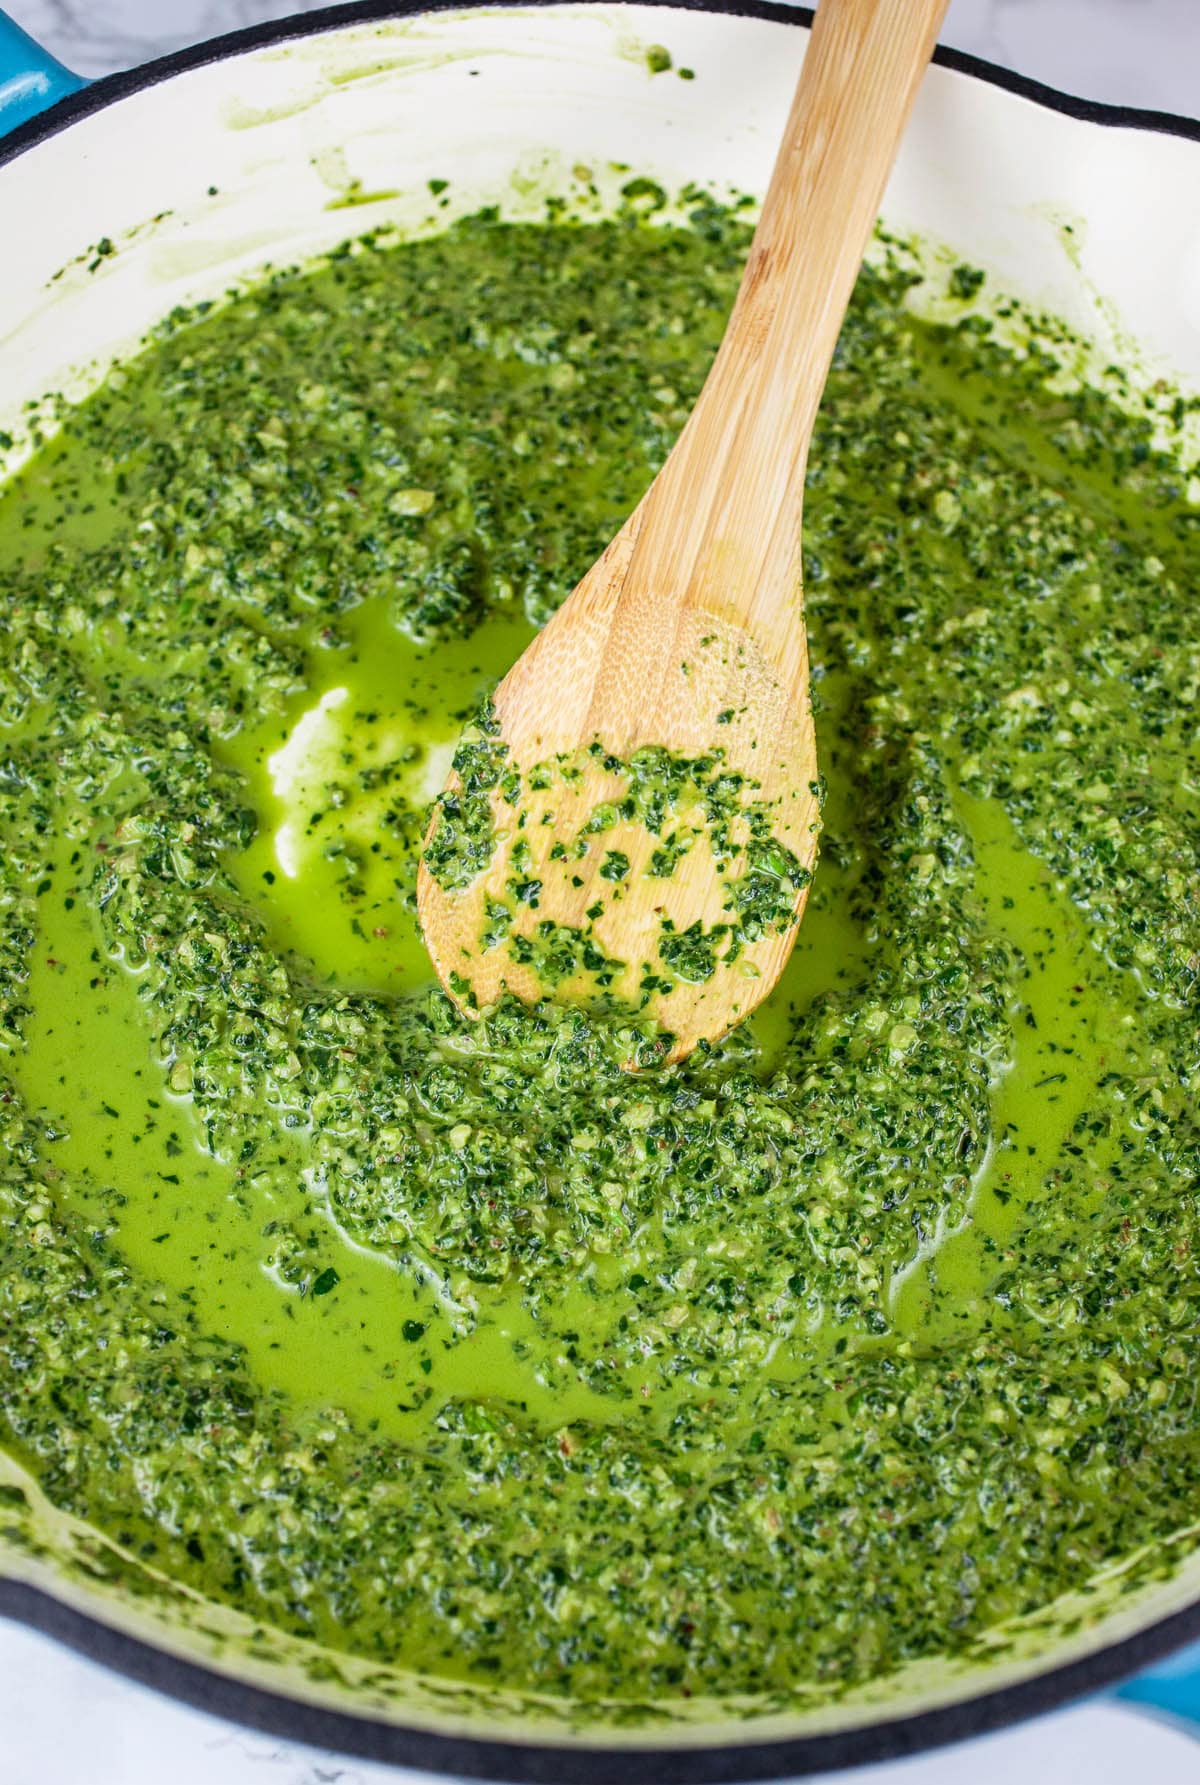 Spinach pesto sauce in skillet with wooden spoon.